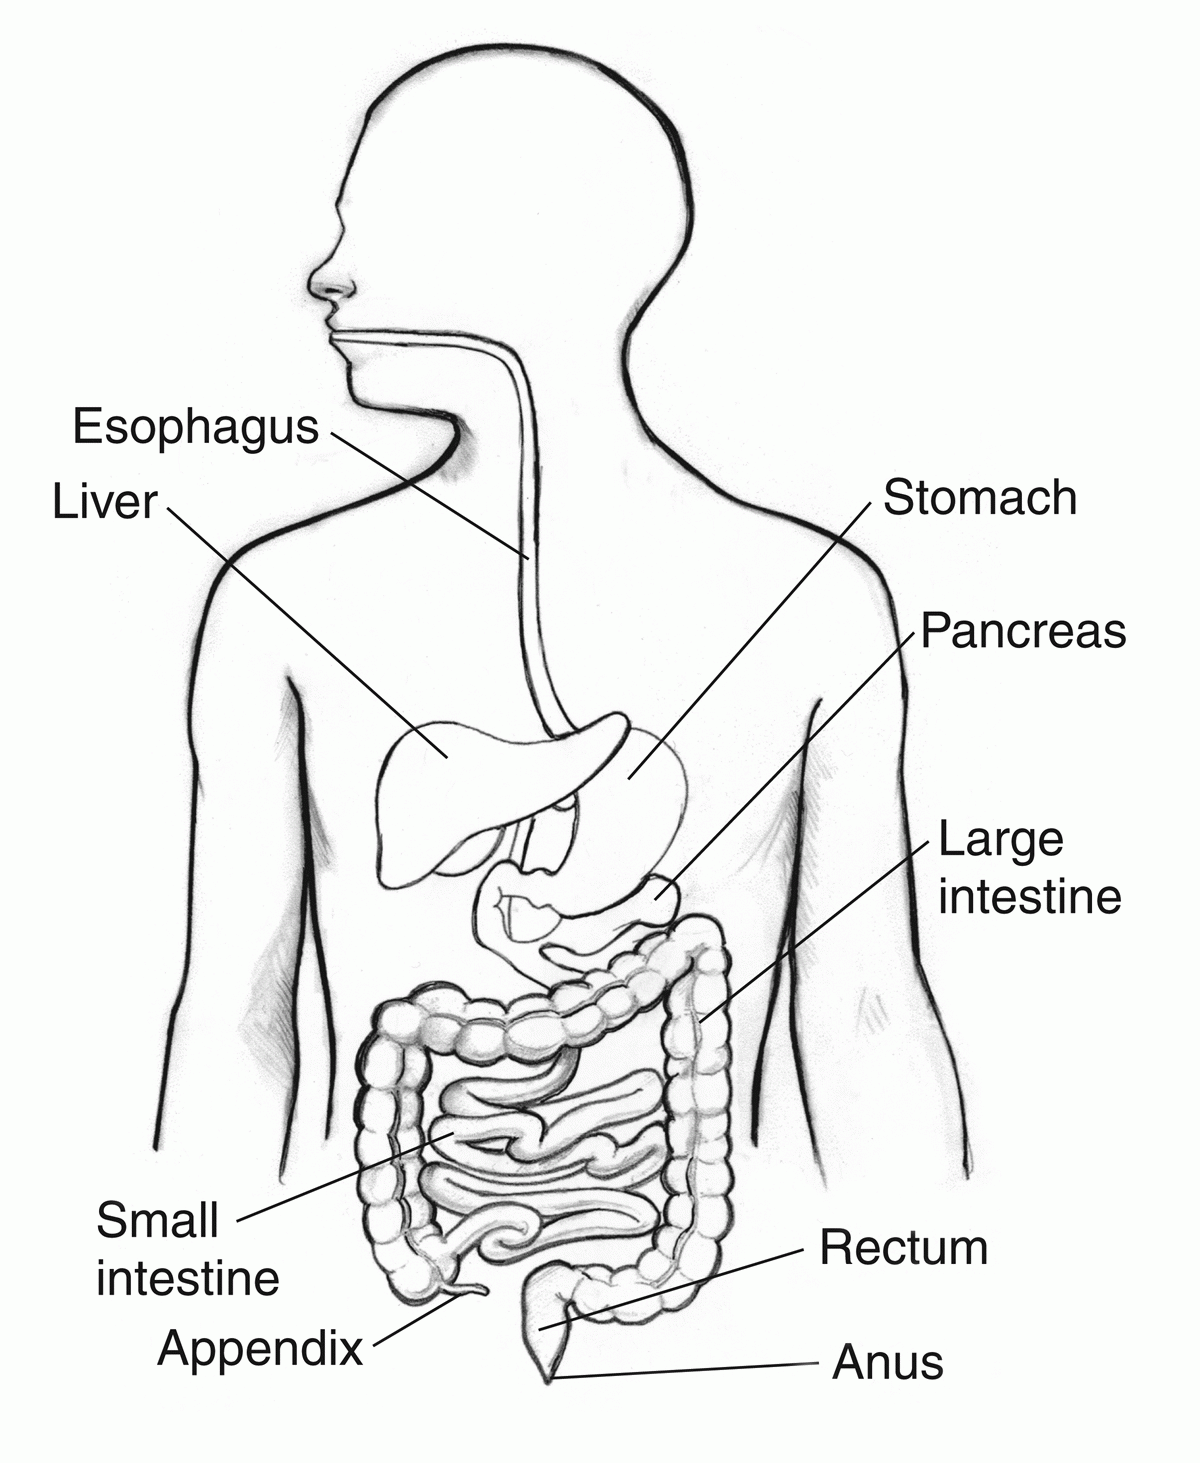 Digestive System Overview - Anatomy and Functions | AI Art Generator | Easy -Peasy.AI